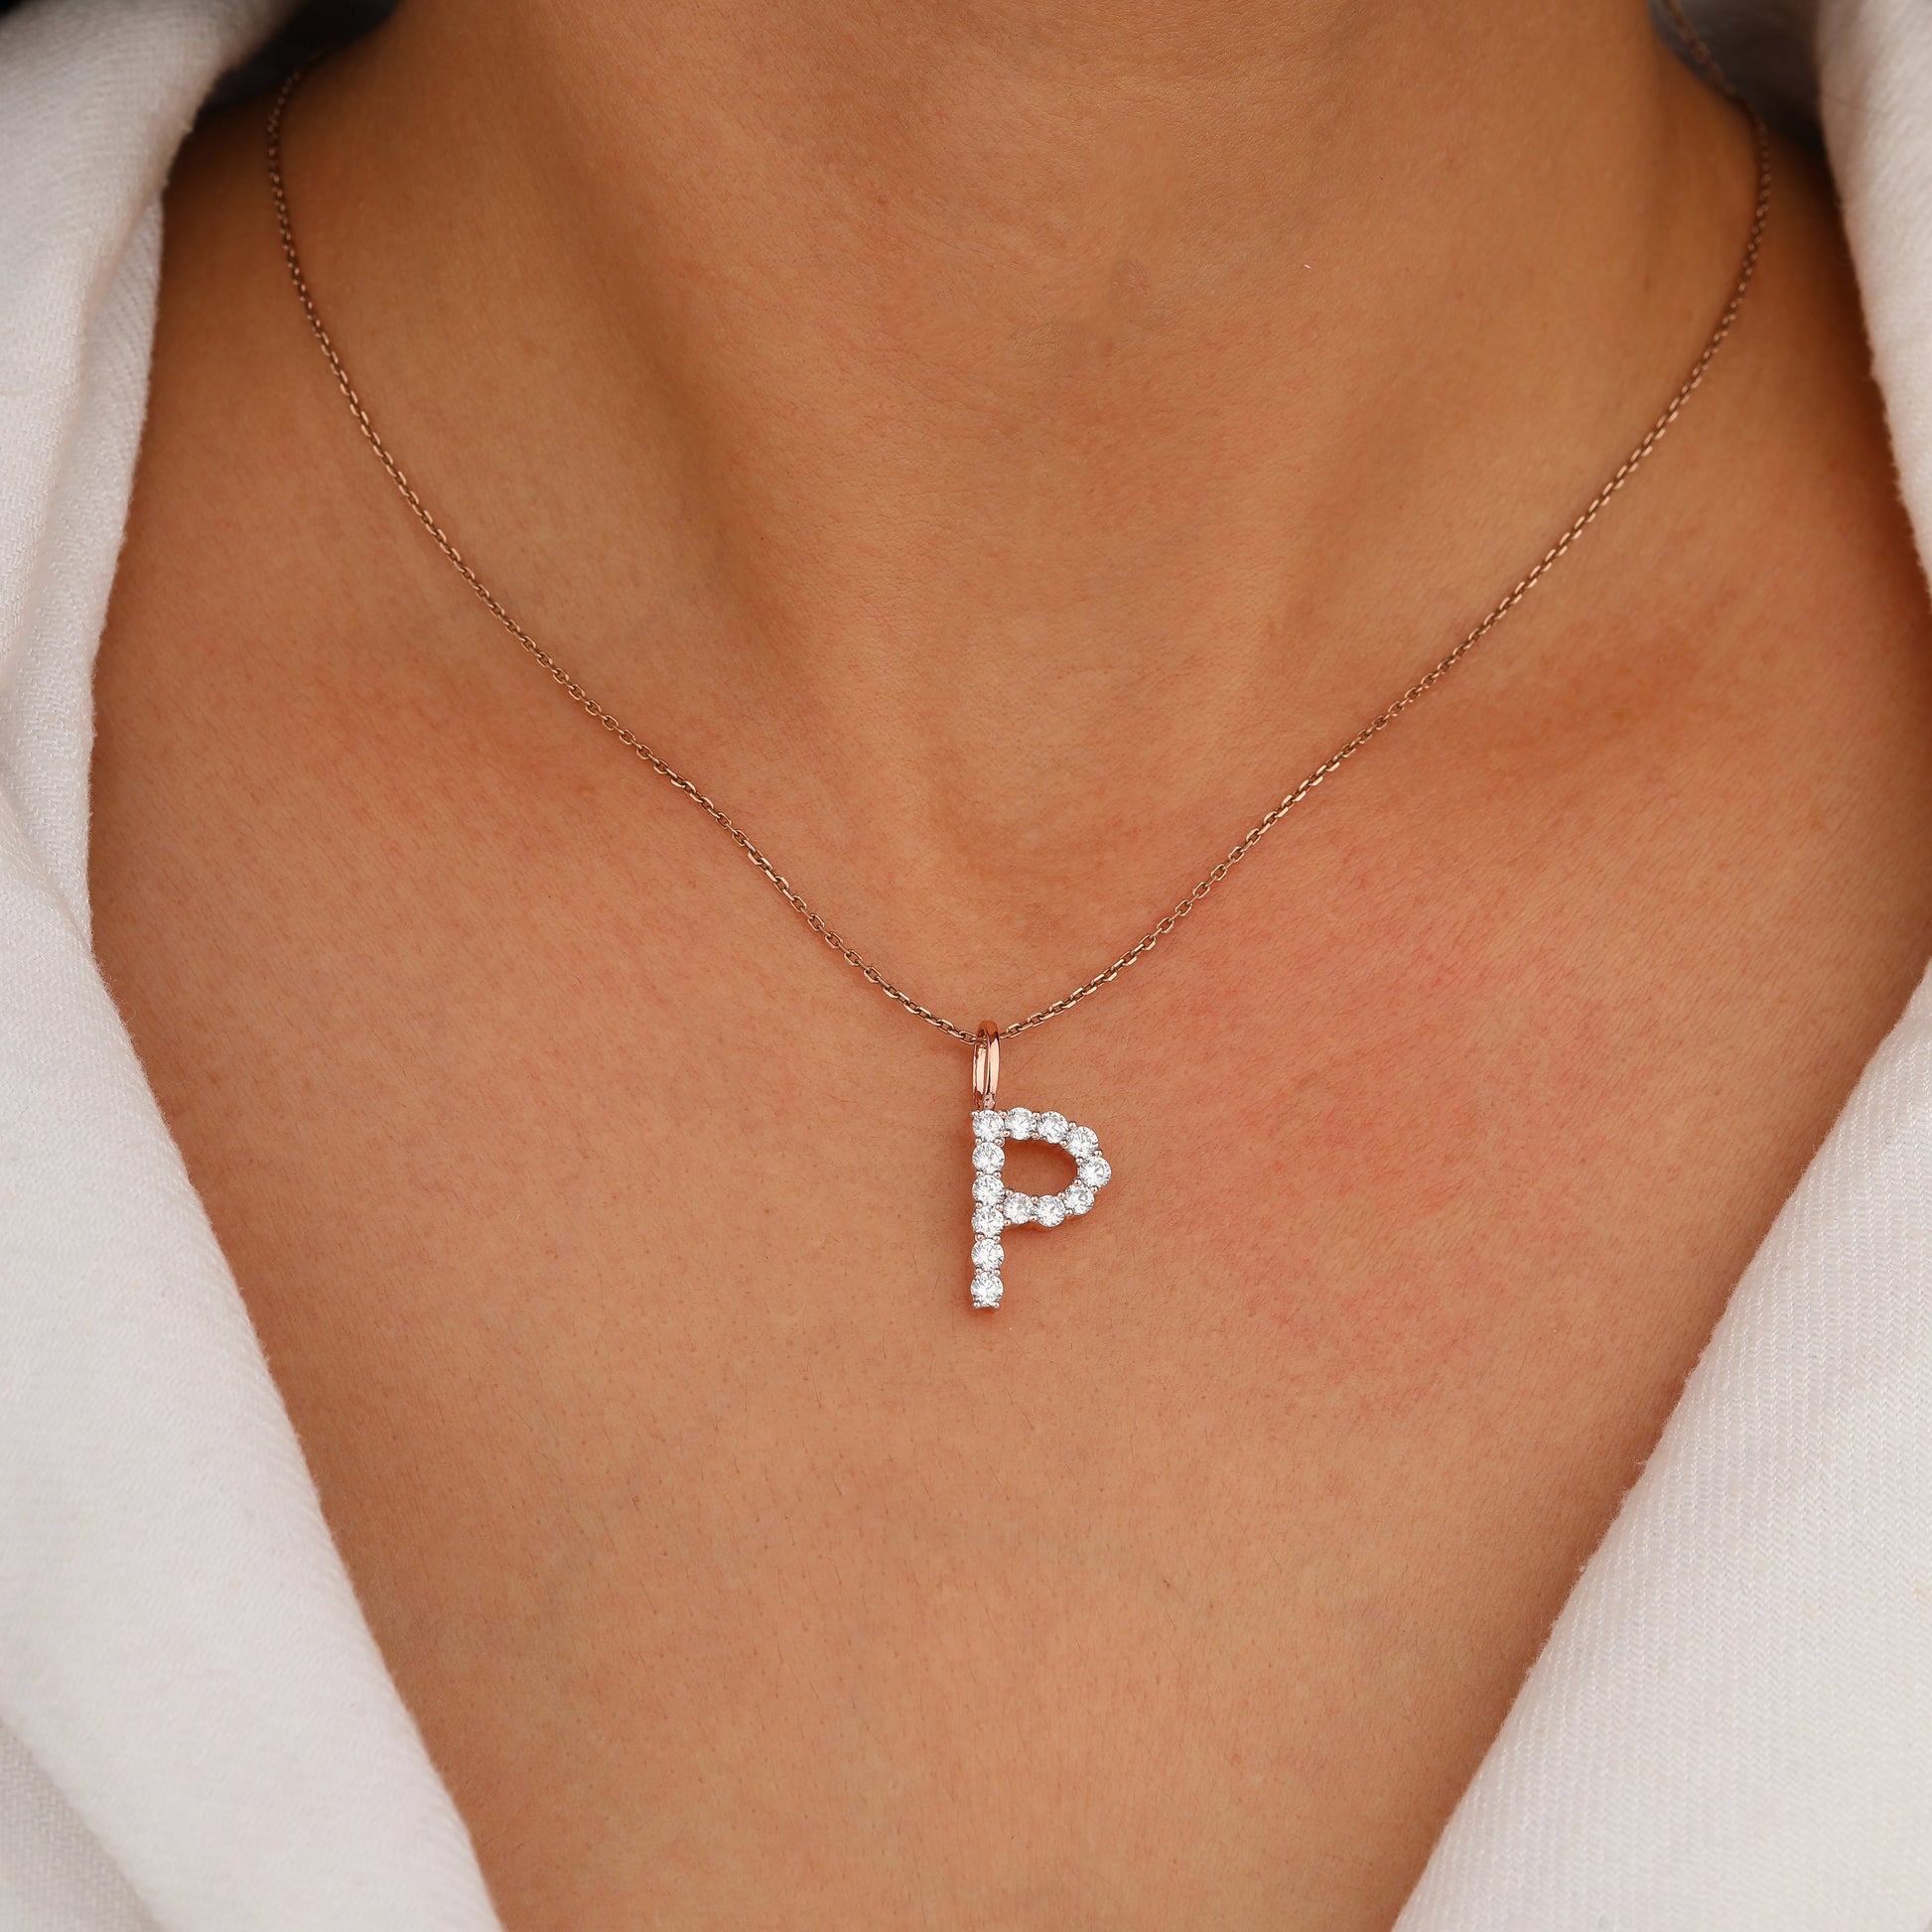 P initial necklace